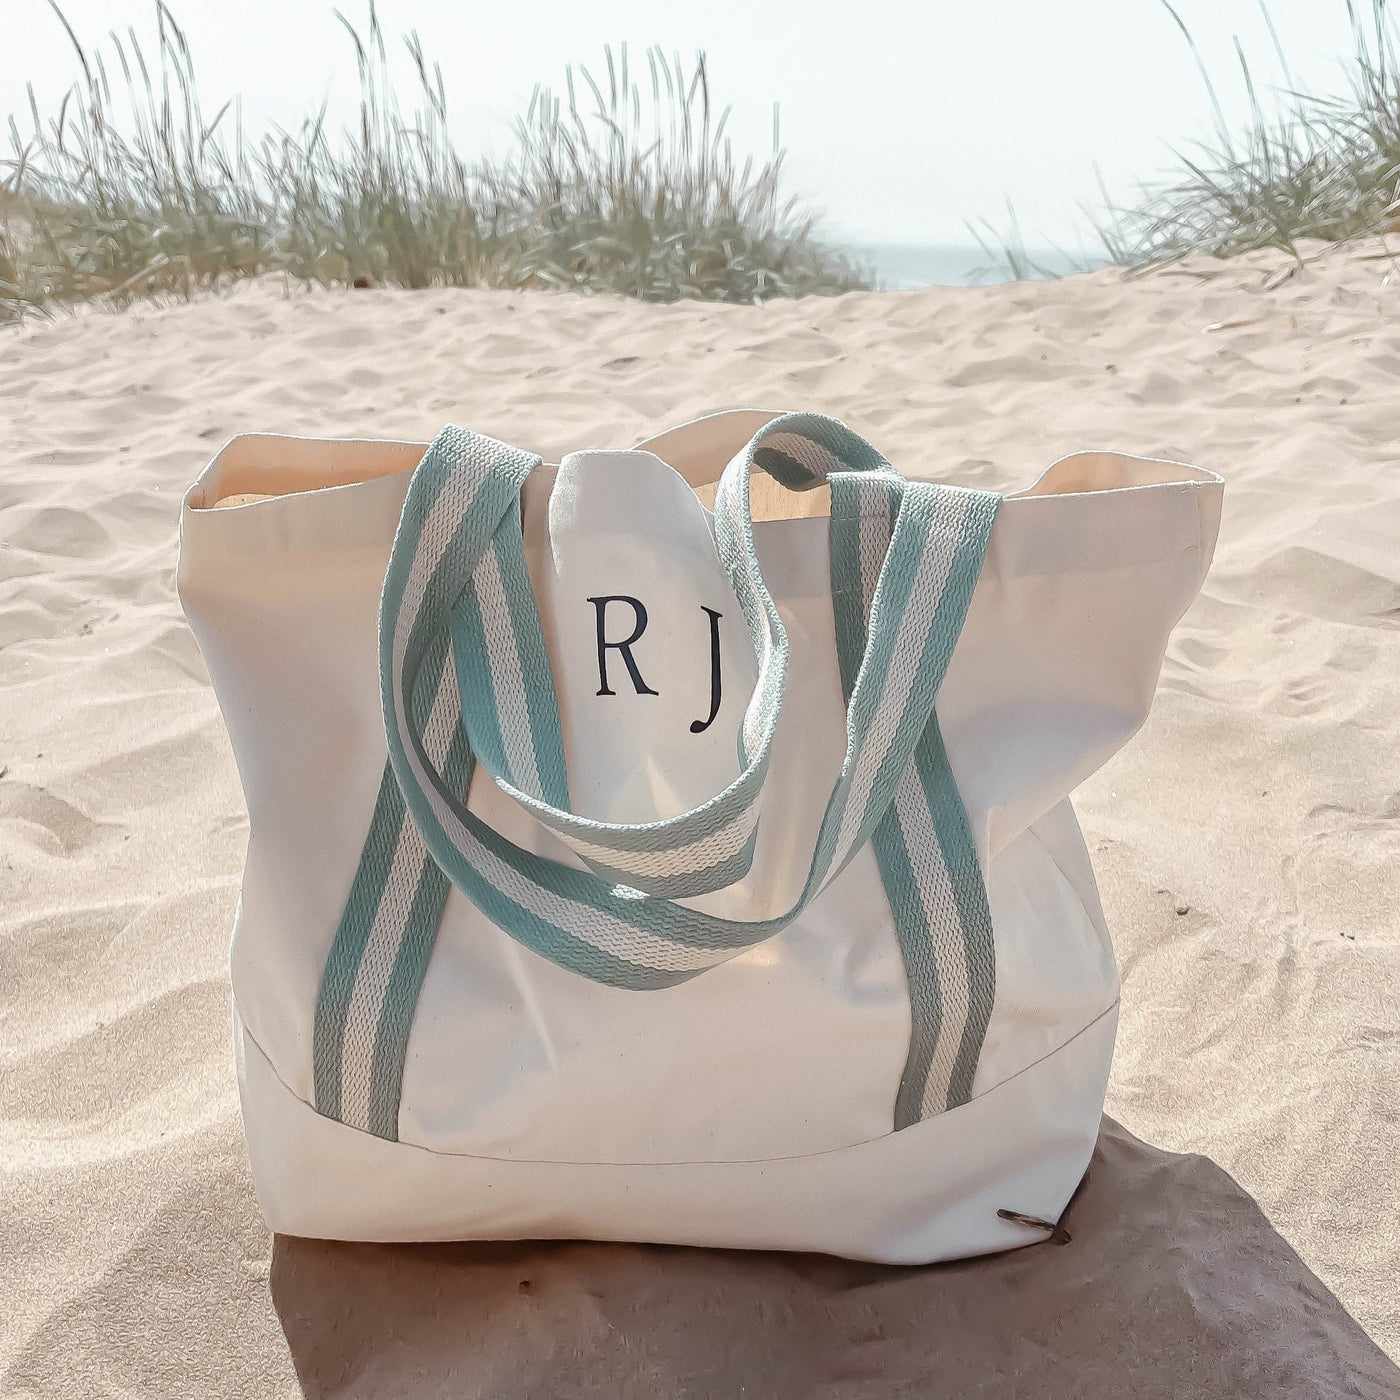 Cotton beach bag in natural with aqua handles and personalised with navy initials